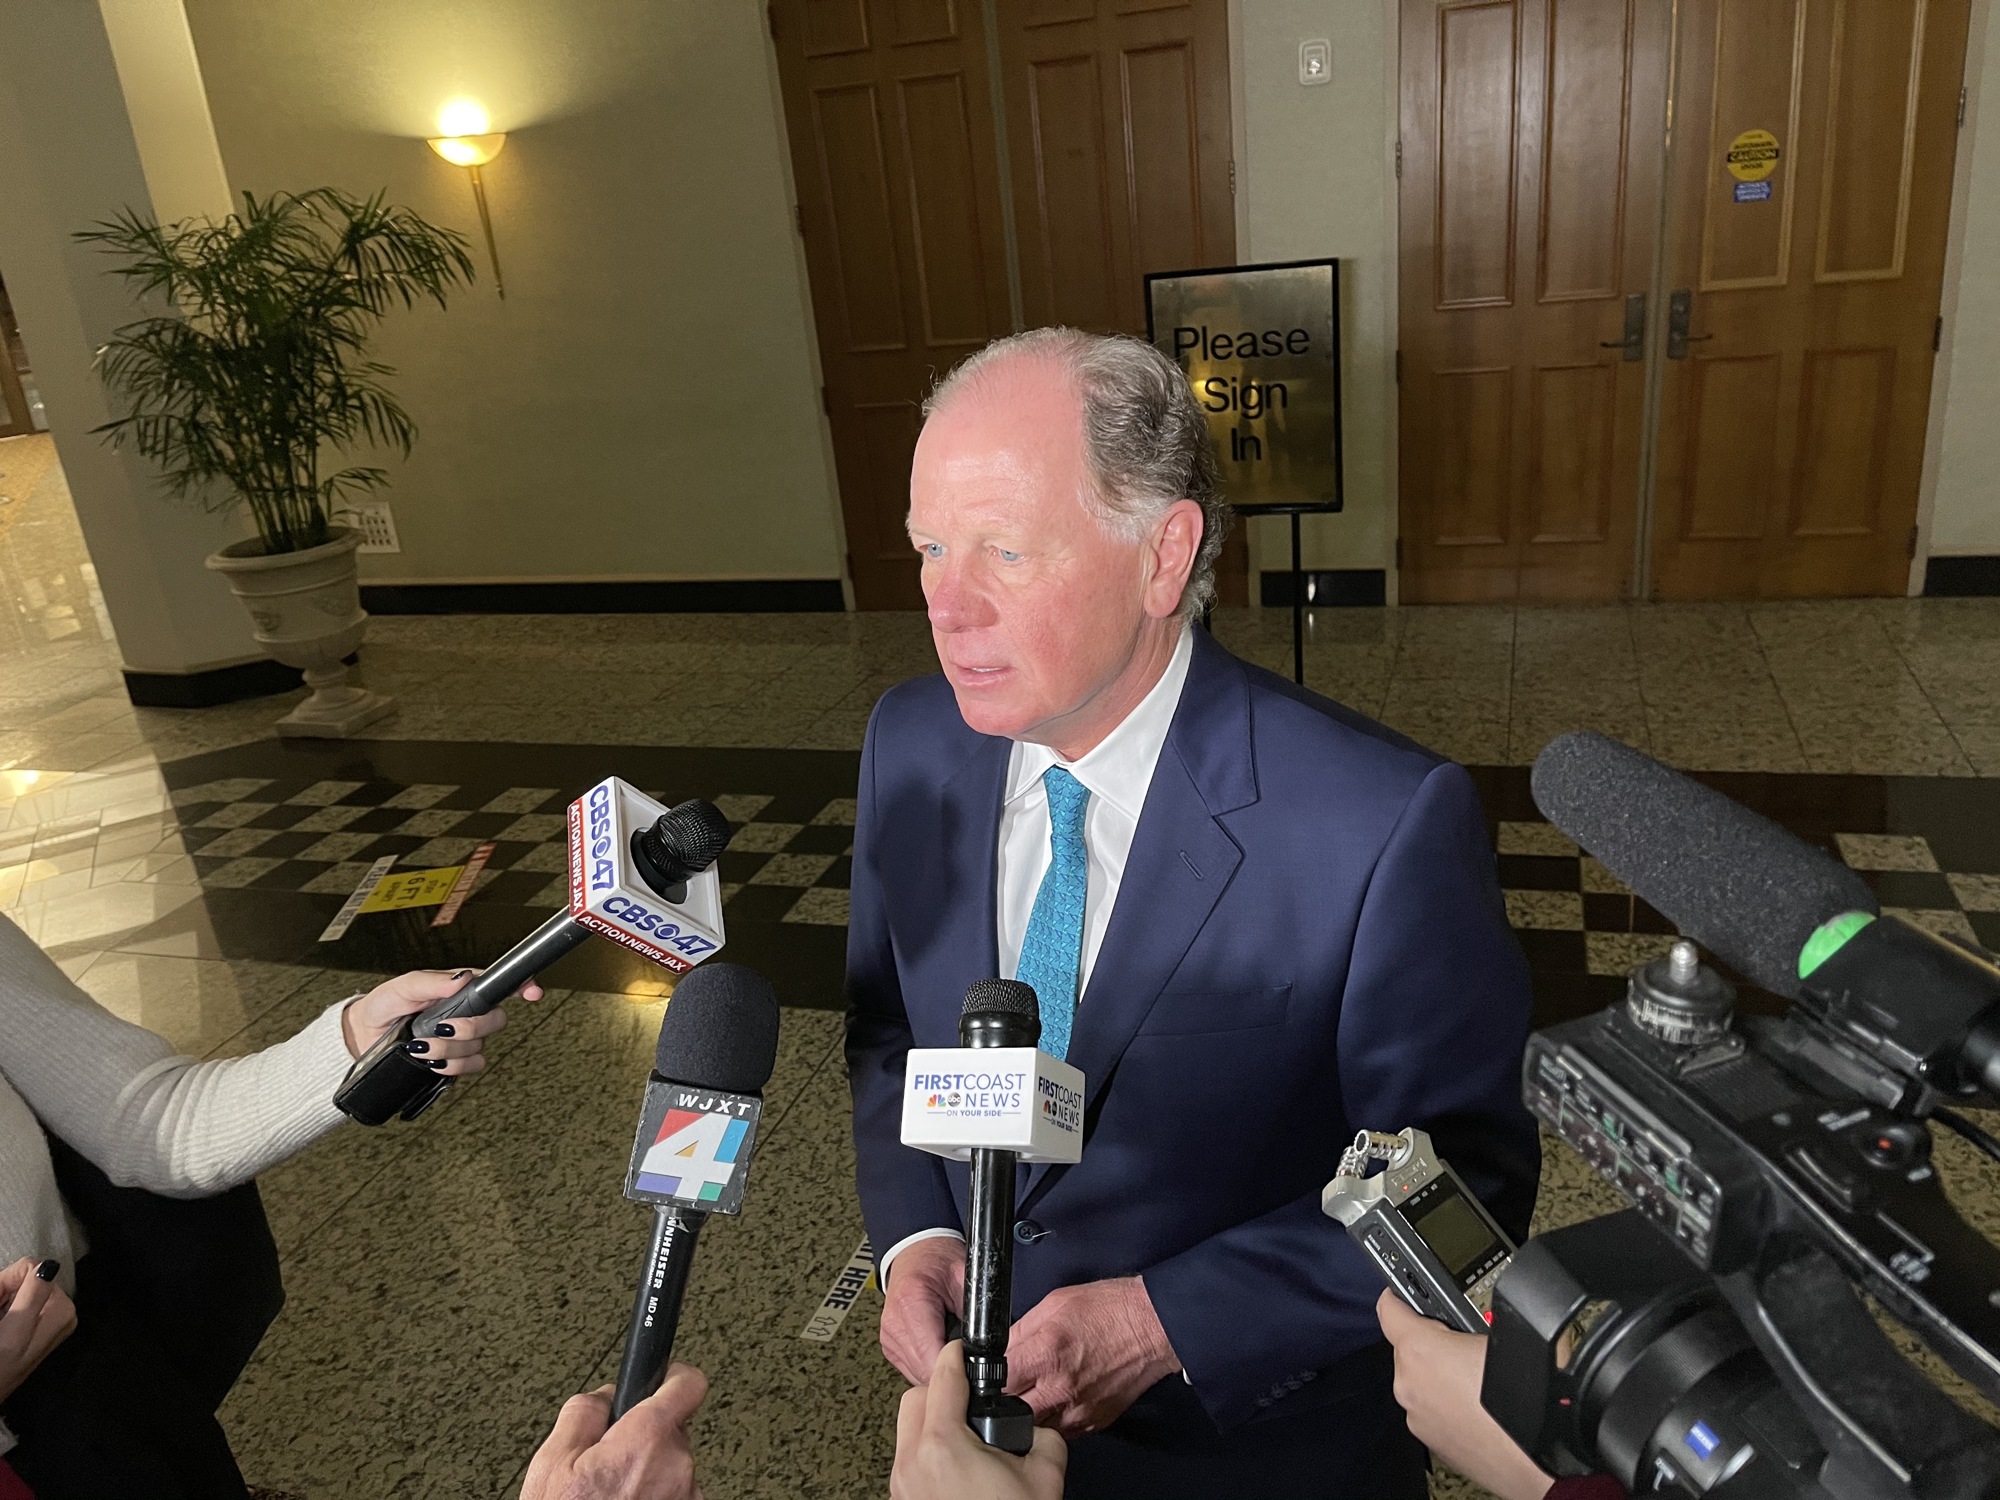 Jacksonville Jaguars President Mark Lamping speaks with reporters after the City Council rejected financial incentives for the mixed-use Lot J development west of TIAA Bank Field.